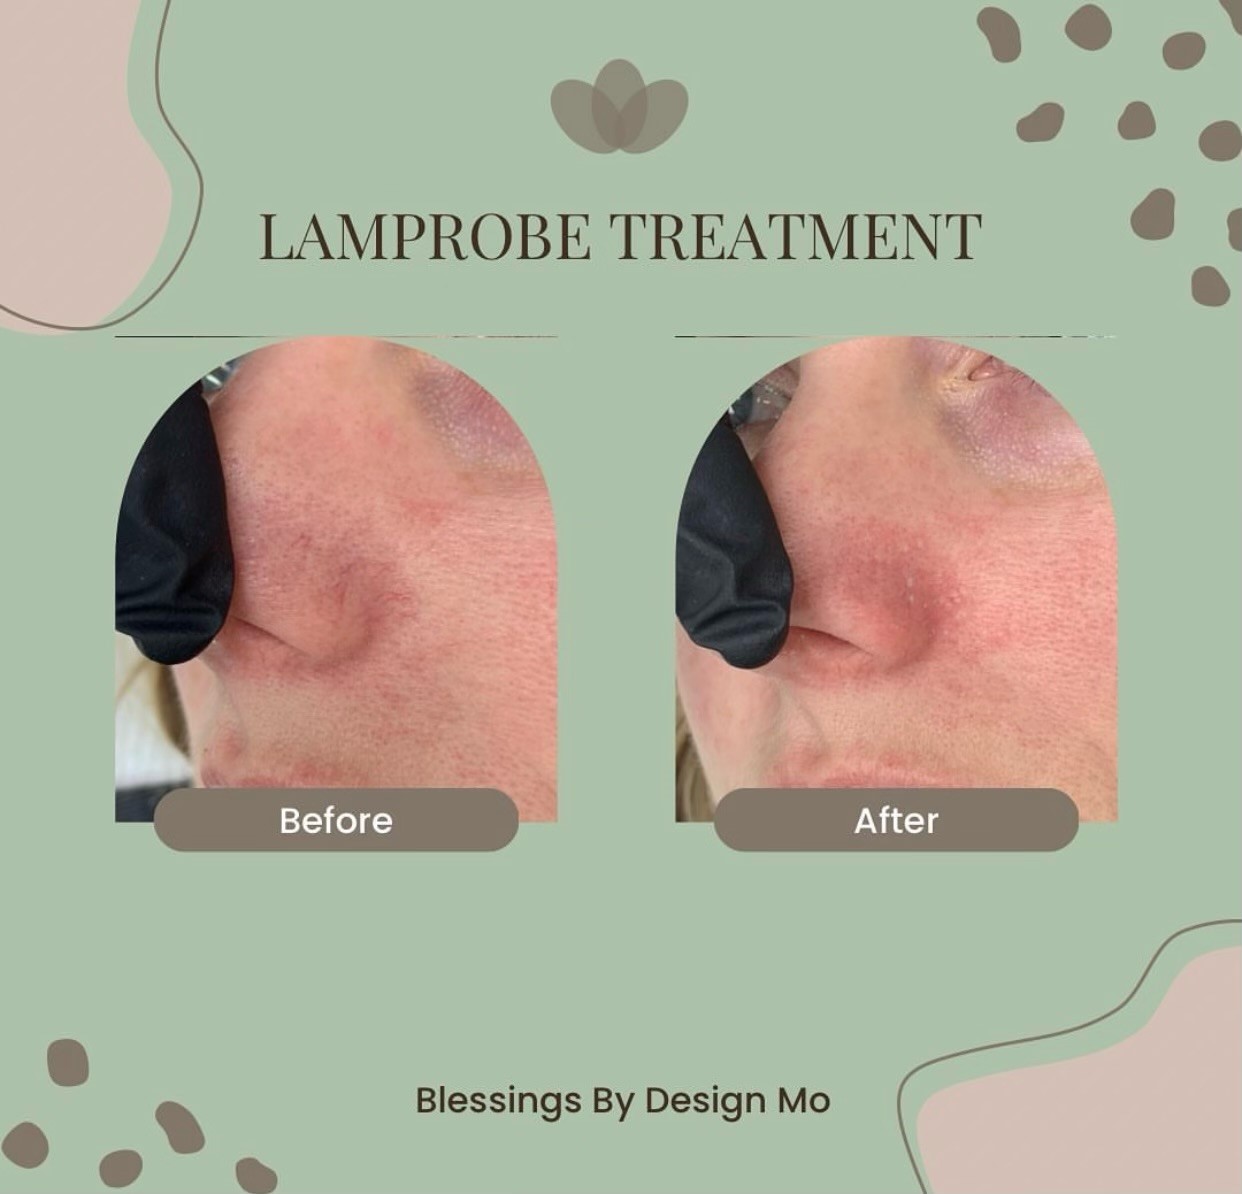 Lamprobe Treatment Before And After